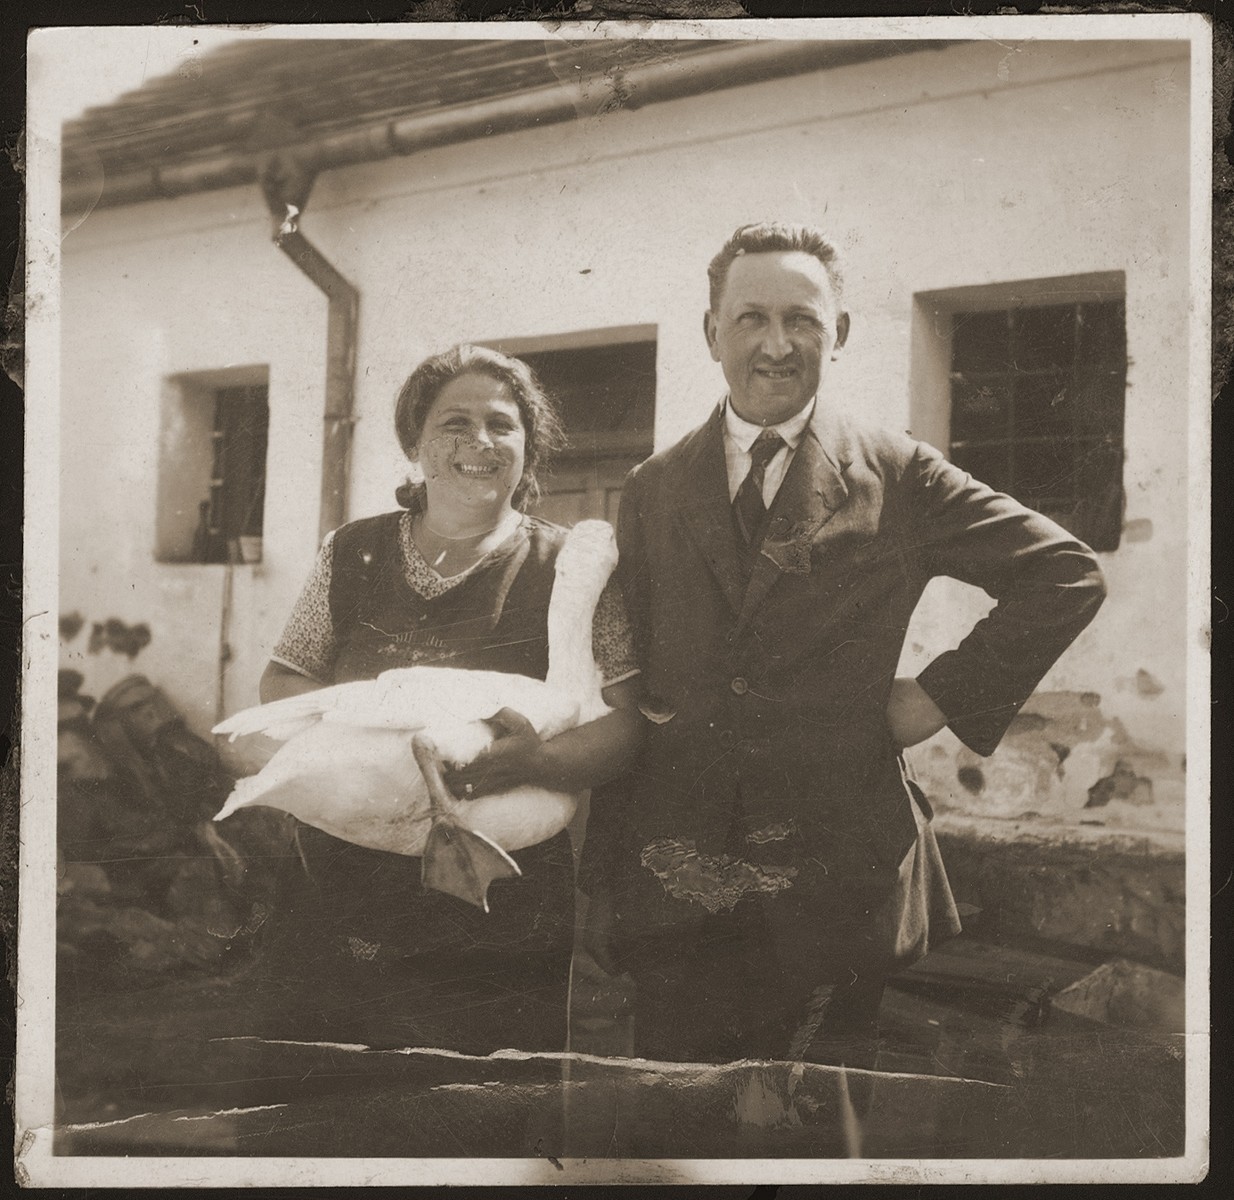 Otto and Klara Spaeth pose with a goose in the backyard of their home in Buchlovice.